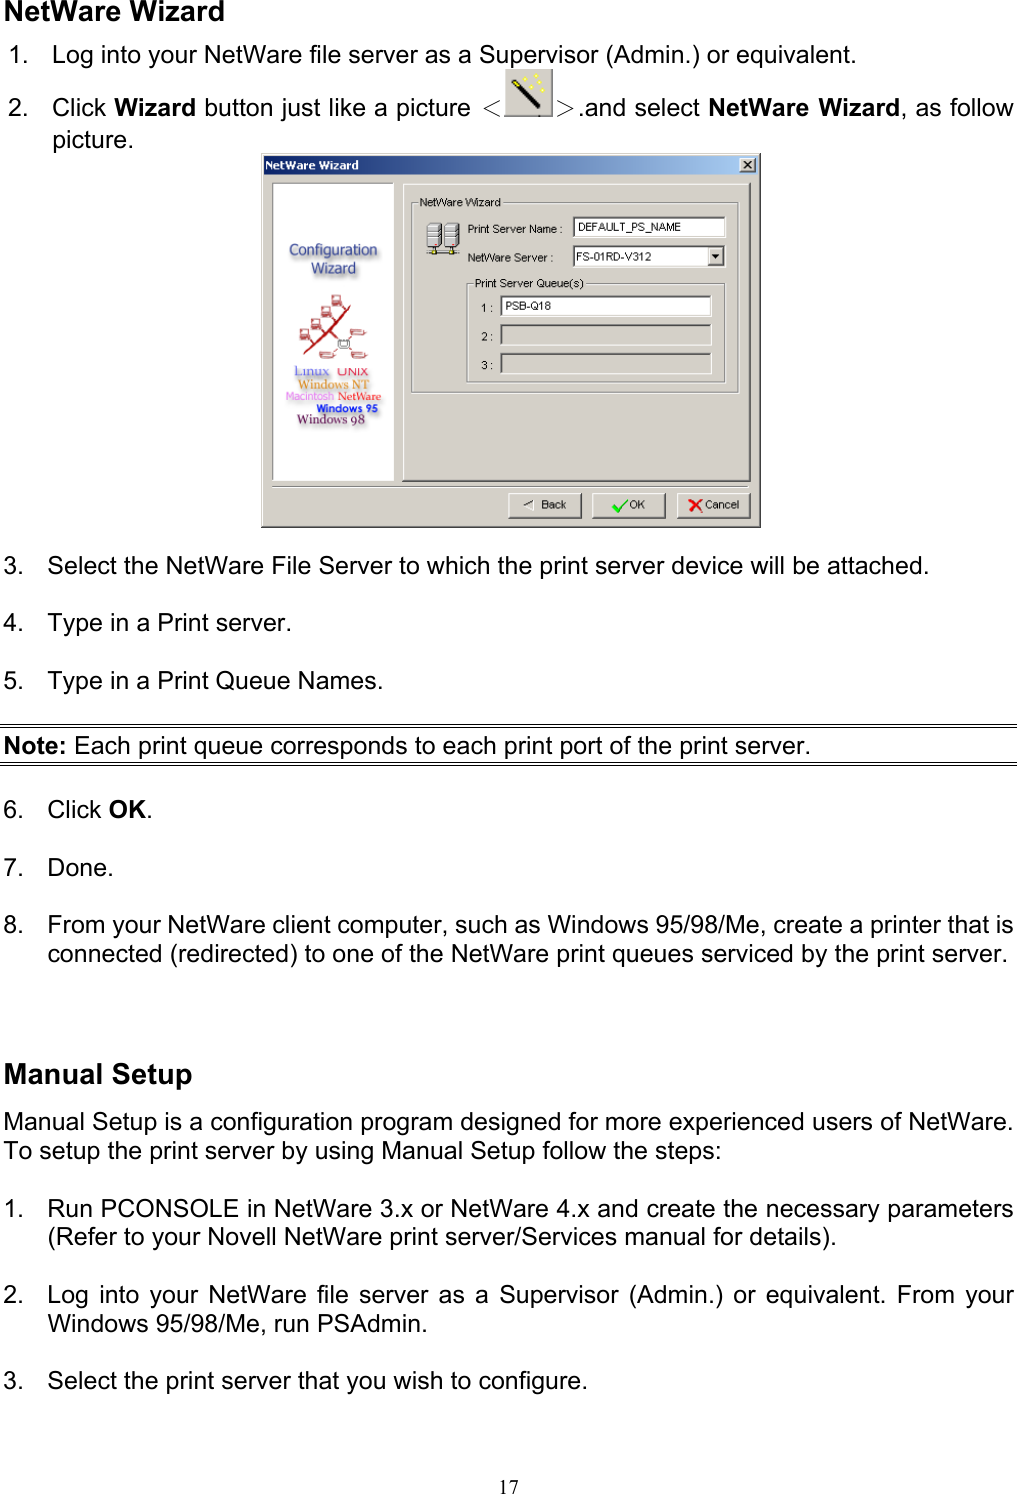                                                                                             17   NetWare Wizard 1.  Log into your NetWare file server as a Supervisor (Admin.) or equivalent. 2. Click Wizard button just like a picture ＜ ＞.and select NetWare Wizard, as follow picture.   3.  Select the NetWare File Server to which the print server device will be attached.  4.  Type in a Print server.  5.  Type in a Print Queue Names.  Note: Each print queue corresponds to each print port of the print server.  6. Click OK.  7. Done.  8.  From your NetWare client computer, such as Windows 95/98/Me, create a printer that is connected (redirected) to one of the NetWare print queues serviced by the print server.    Manual Setup Manual Setup is a configuration program designed for more experienced users of NetWare. To setup the print server by using Manual Setup follow the steps:  1.  Run PCONSOLE in NetWare 3.x or NetWare 4.x and create the necessary parameters (Refer to your Novell NetWare print server/Services manual for details).   2.  Log into your NetWare file server as a Supervisor (Admin.) or equivalent. From your Windows 95/98/Me, run PSAdmin.  3.  Select the print server that you wish to configure.  